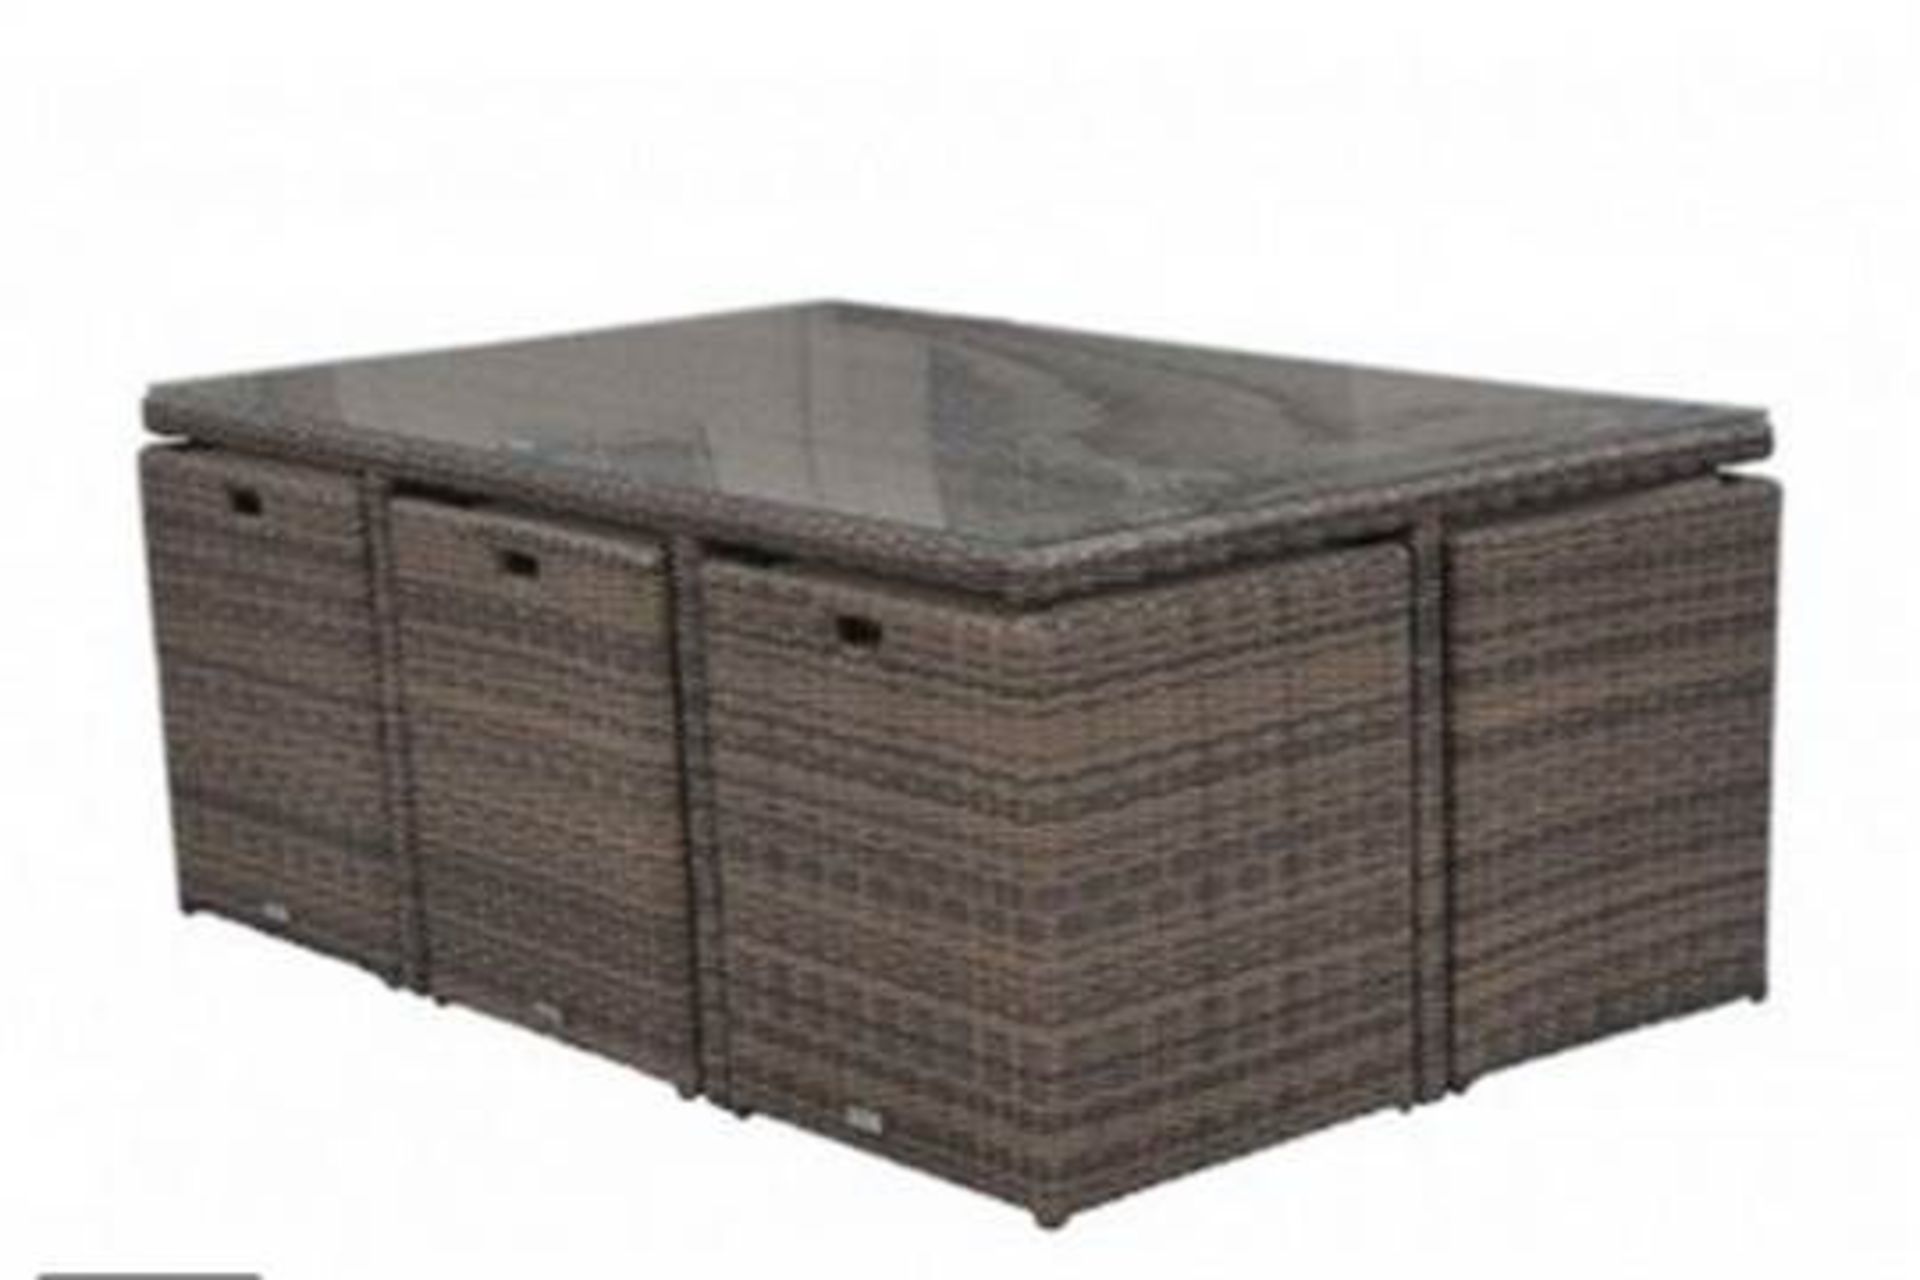 * Barcelona 7 Piece All Weather Rattan Cube Set in Truffle and Champagne online sale price £999. All - Image 2 of 2